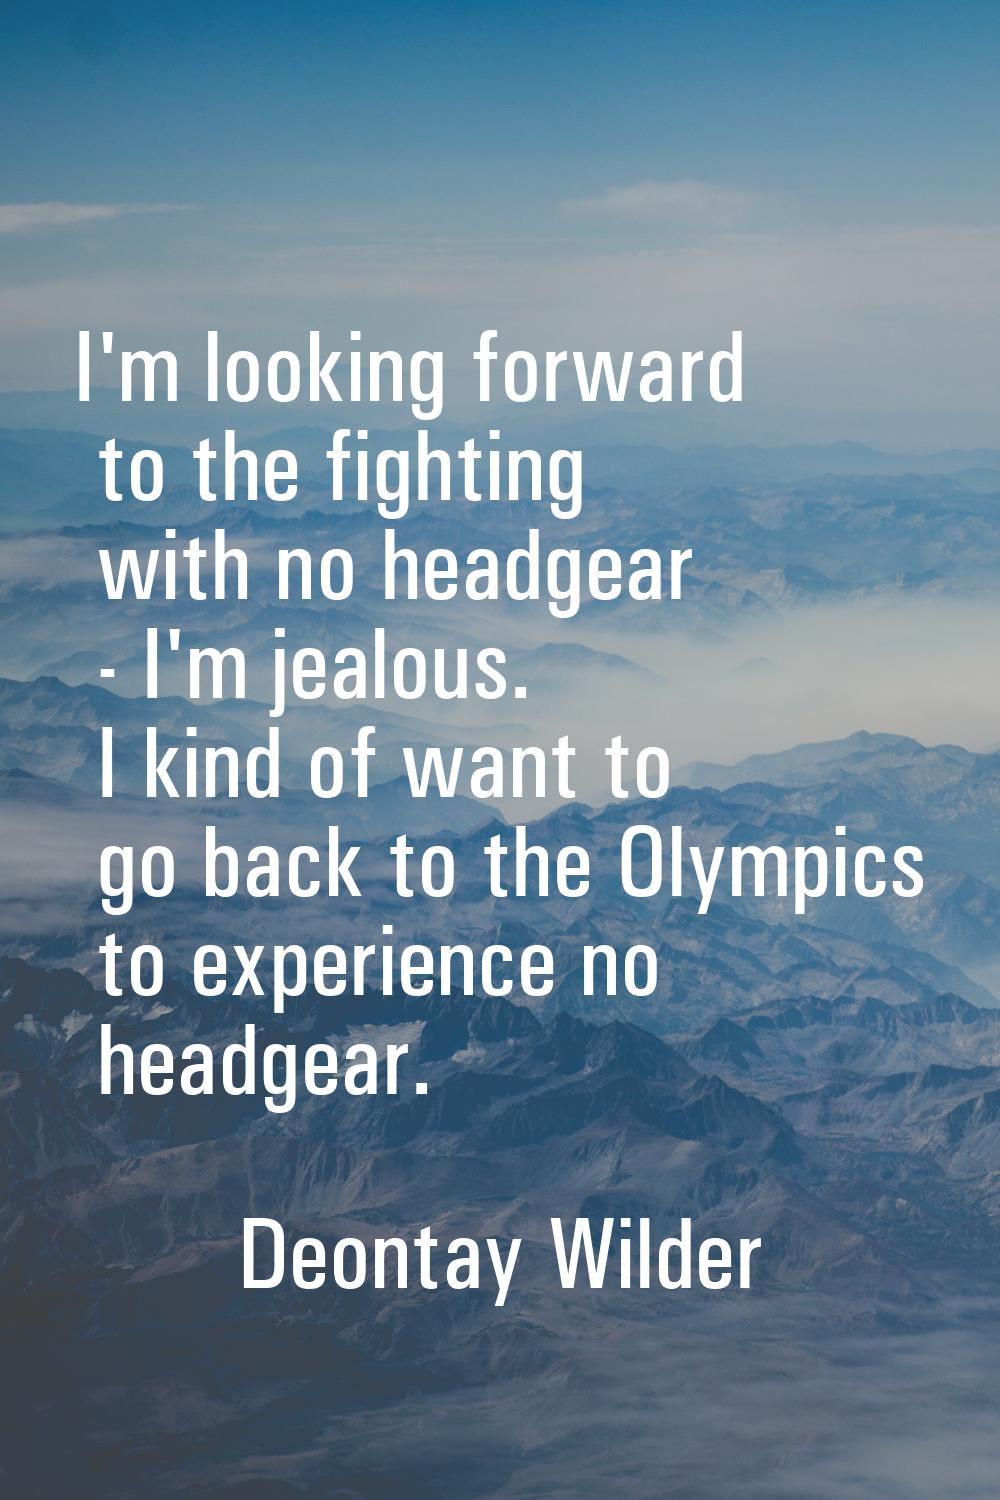 I'm looking forward to the fighting with no headgear - I'm jealous. I kind of want to go back to th